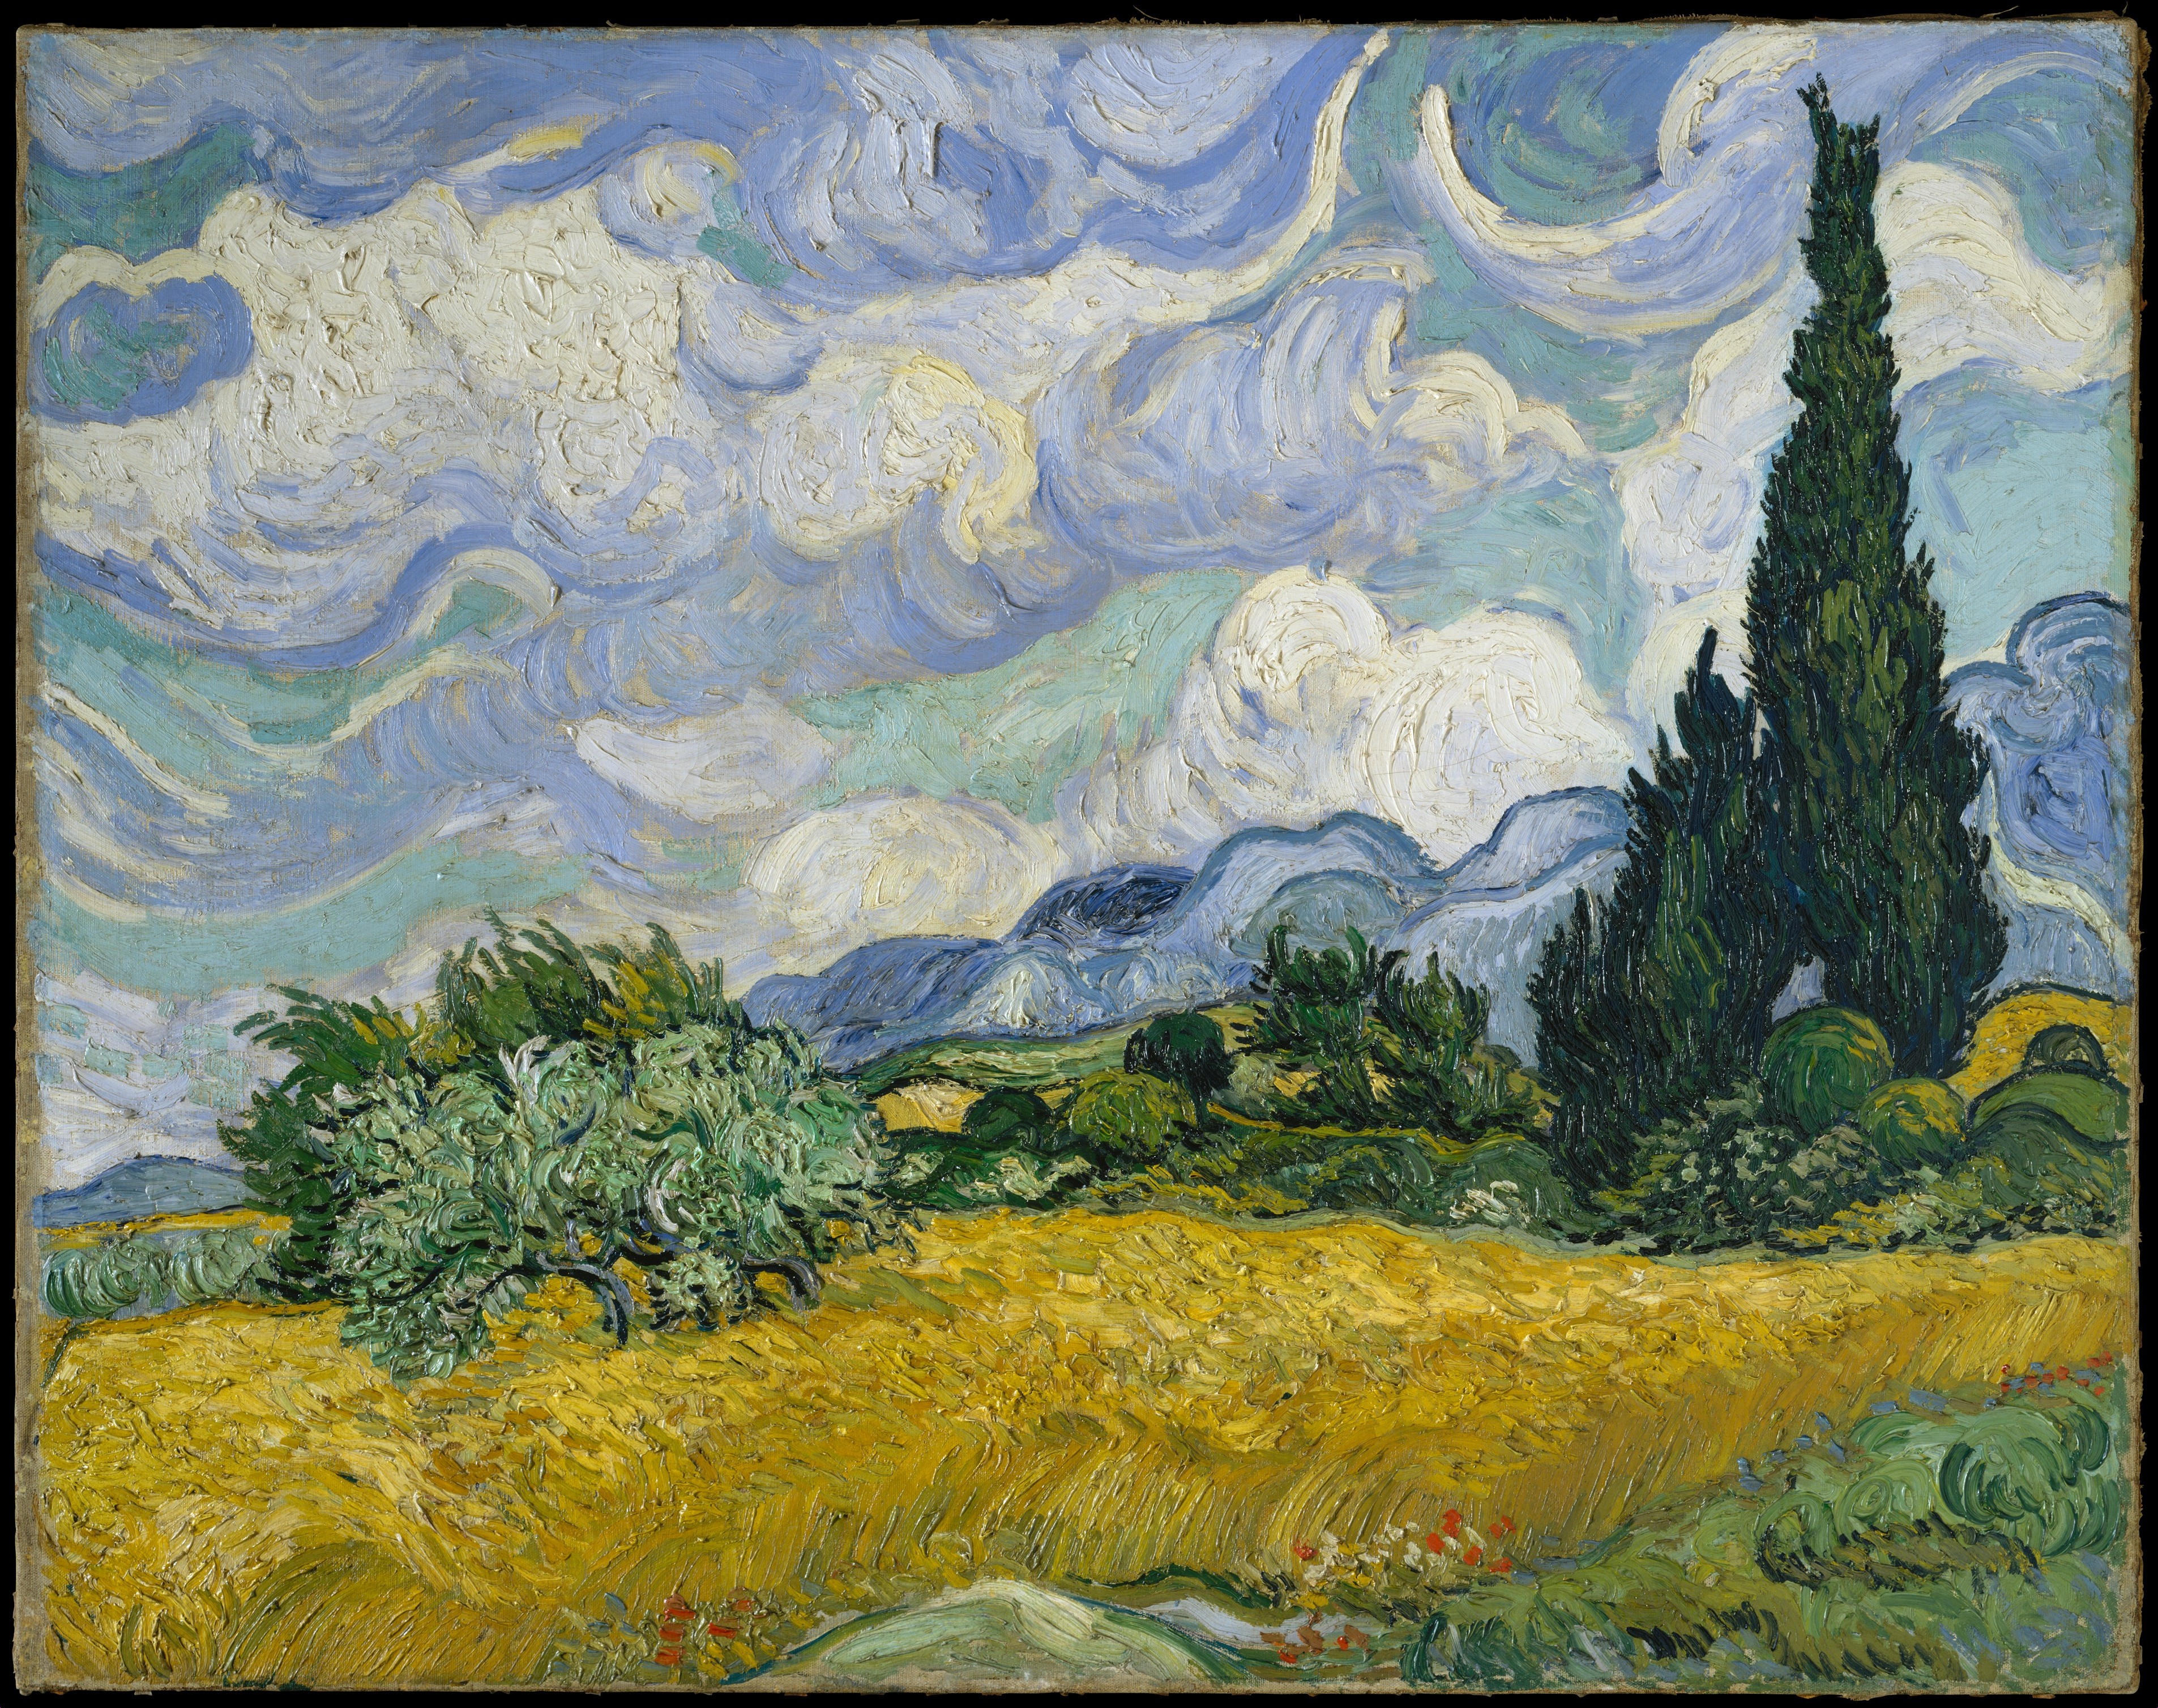 Wieco Art Wheat Field with Cypresses by Van Gogh Famous Oil Paintings Reproduction Modern Framed Landscape Giclee Canvas Prints Artwork Pictures on Canvas Wall Art for Home Office Decorations 